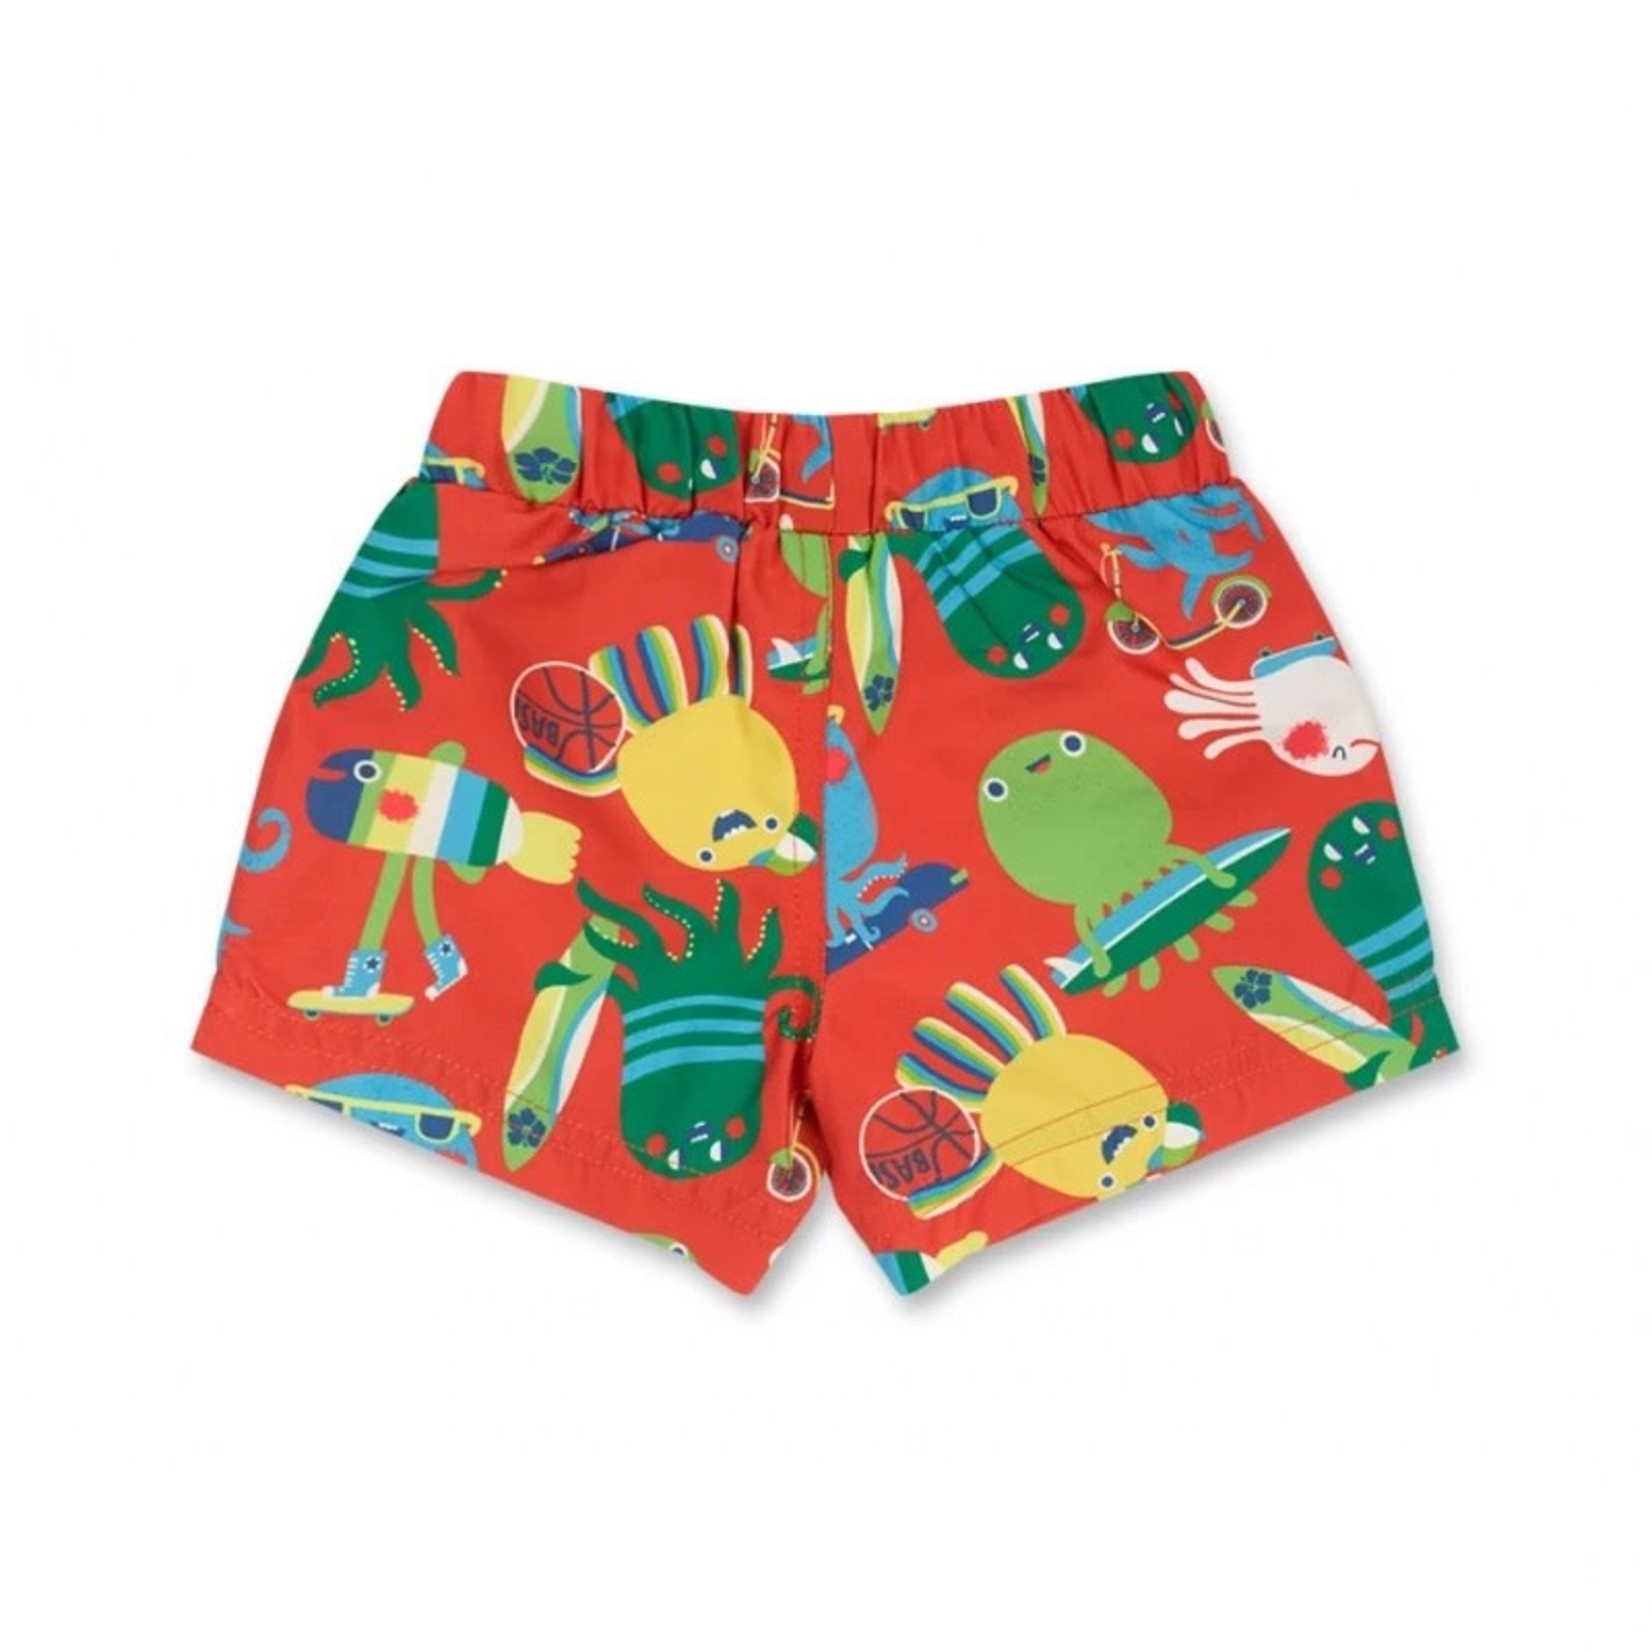 TucTuc TUC TUC - Short maillot avec motif d'animaux marins rigolos 'Holidays'